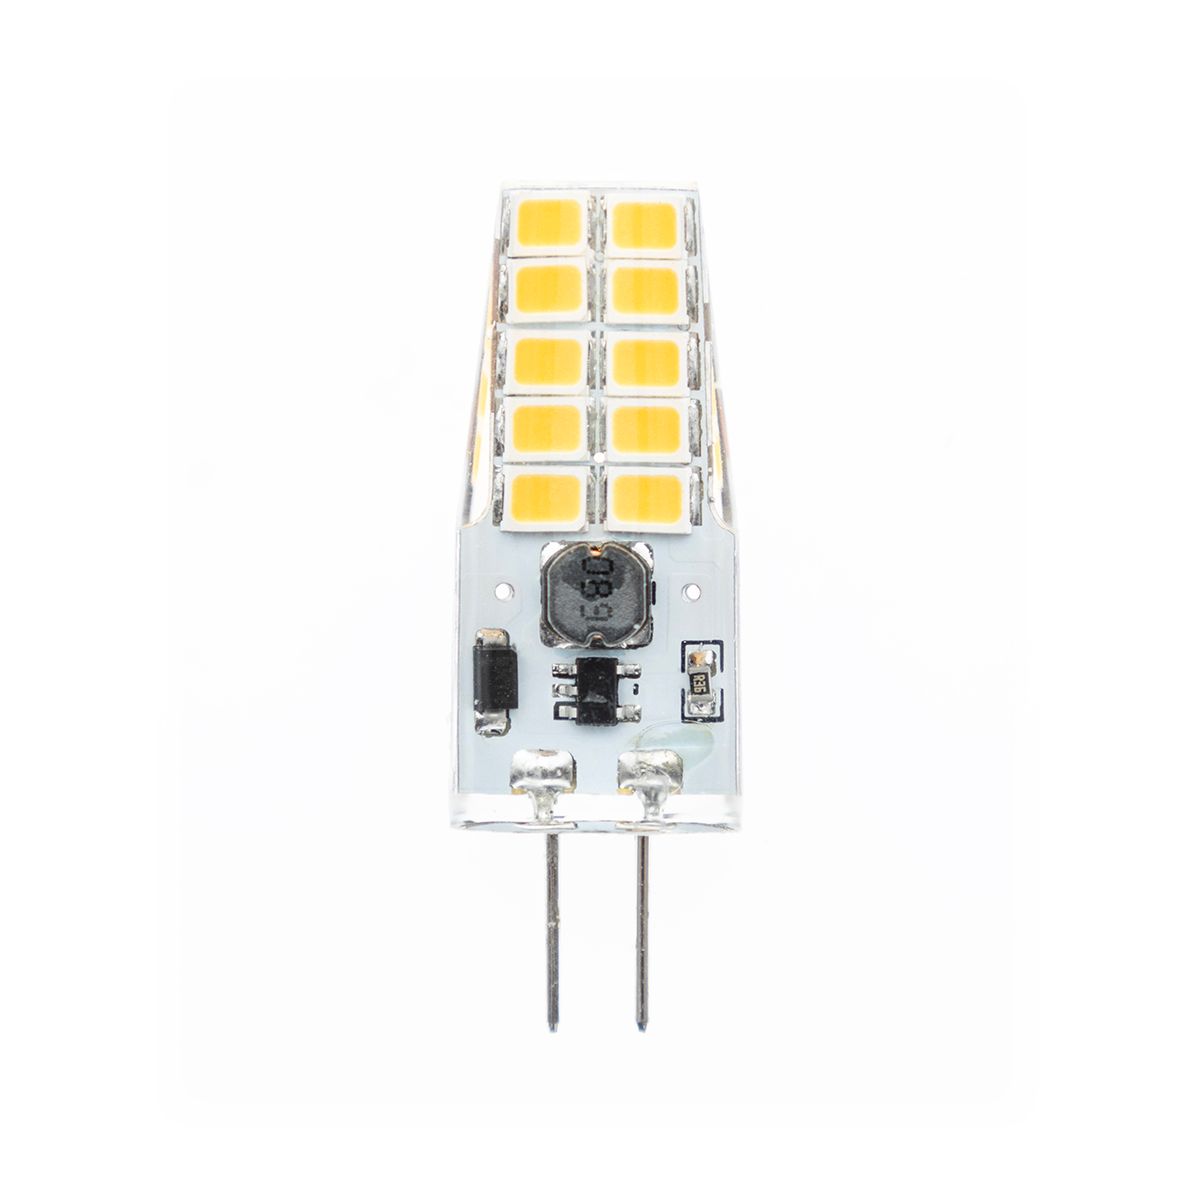 Efficient LED 12V Lights by Finnish Company - Save Energy Now